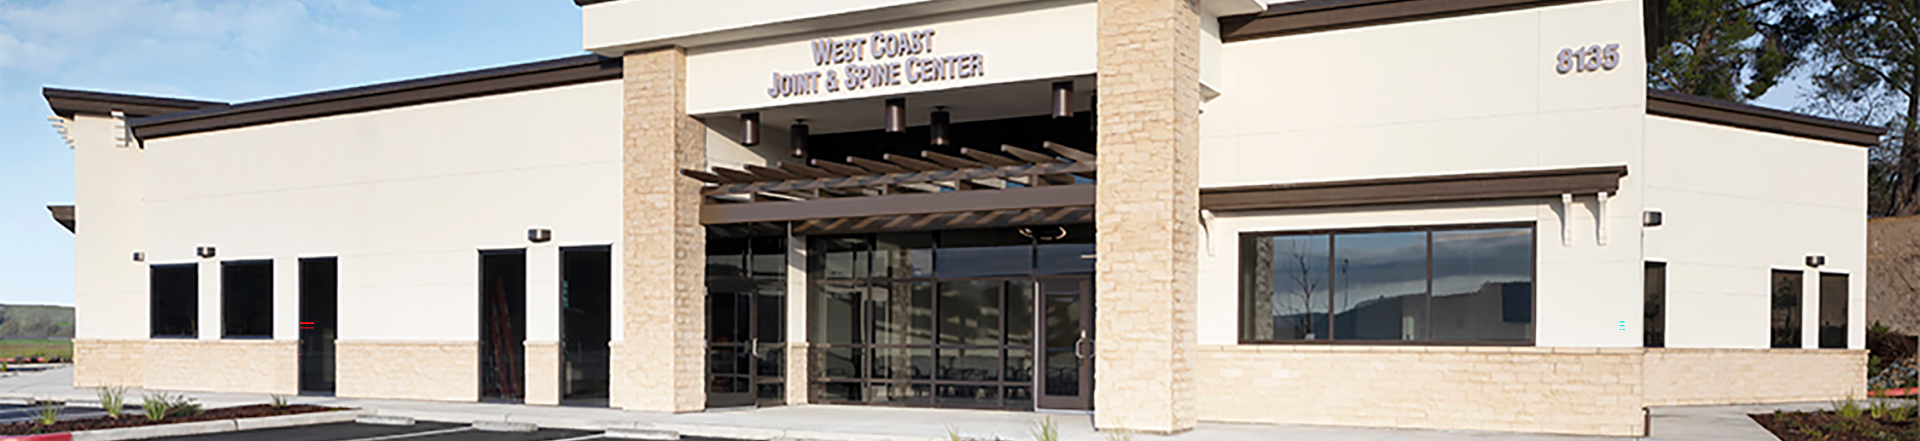 West Coast Joint and Spine Surgery Center